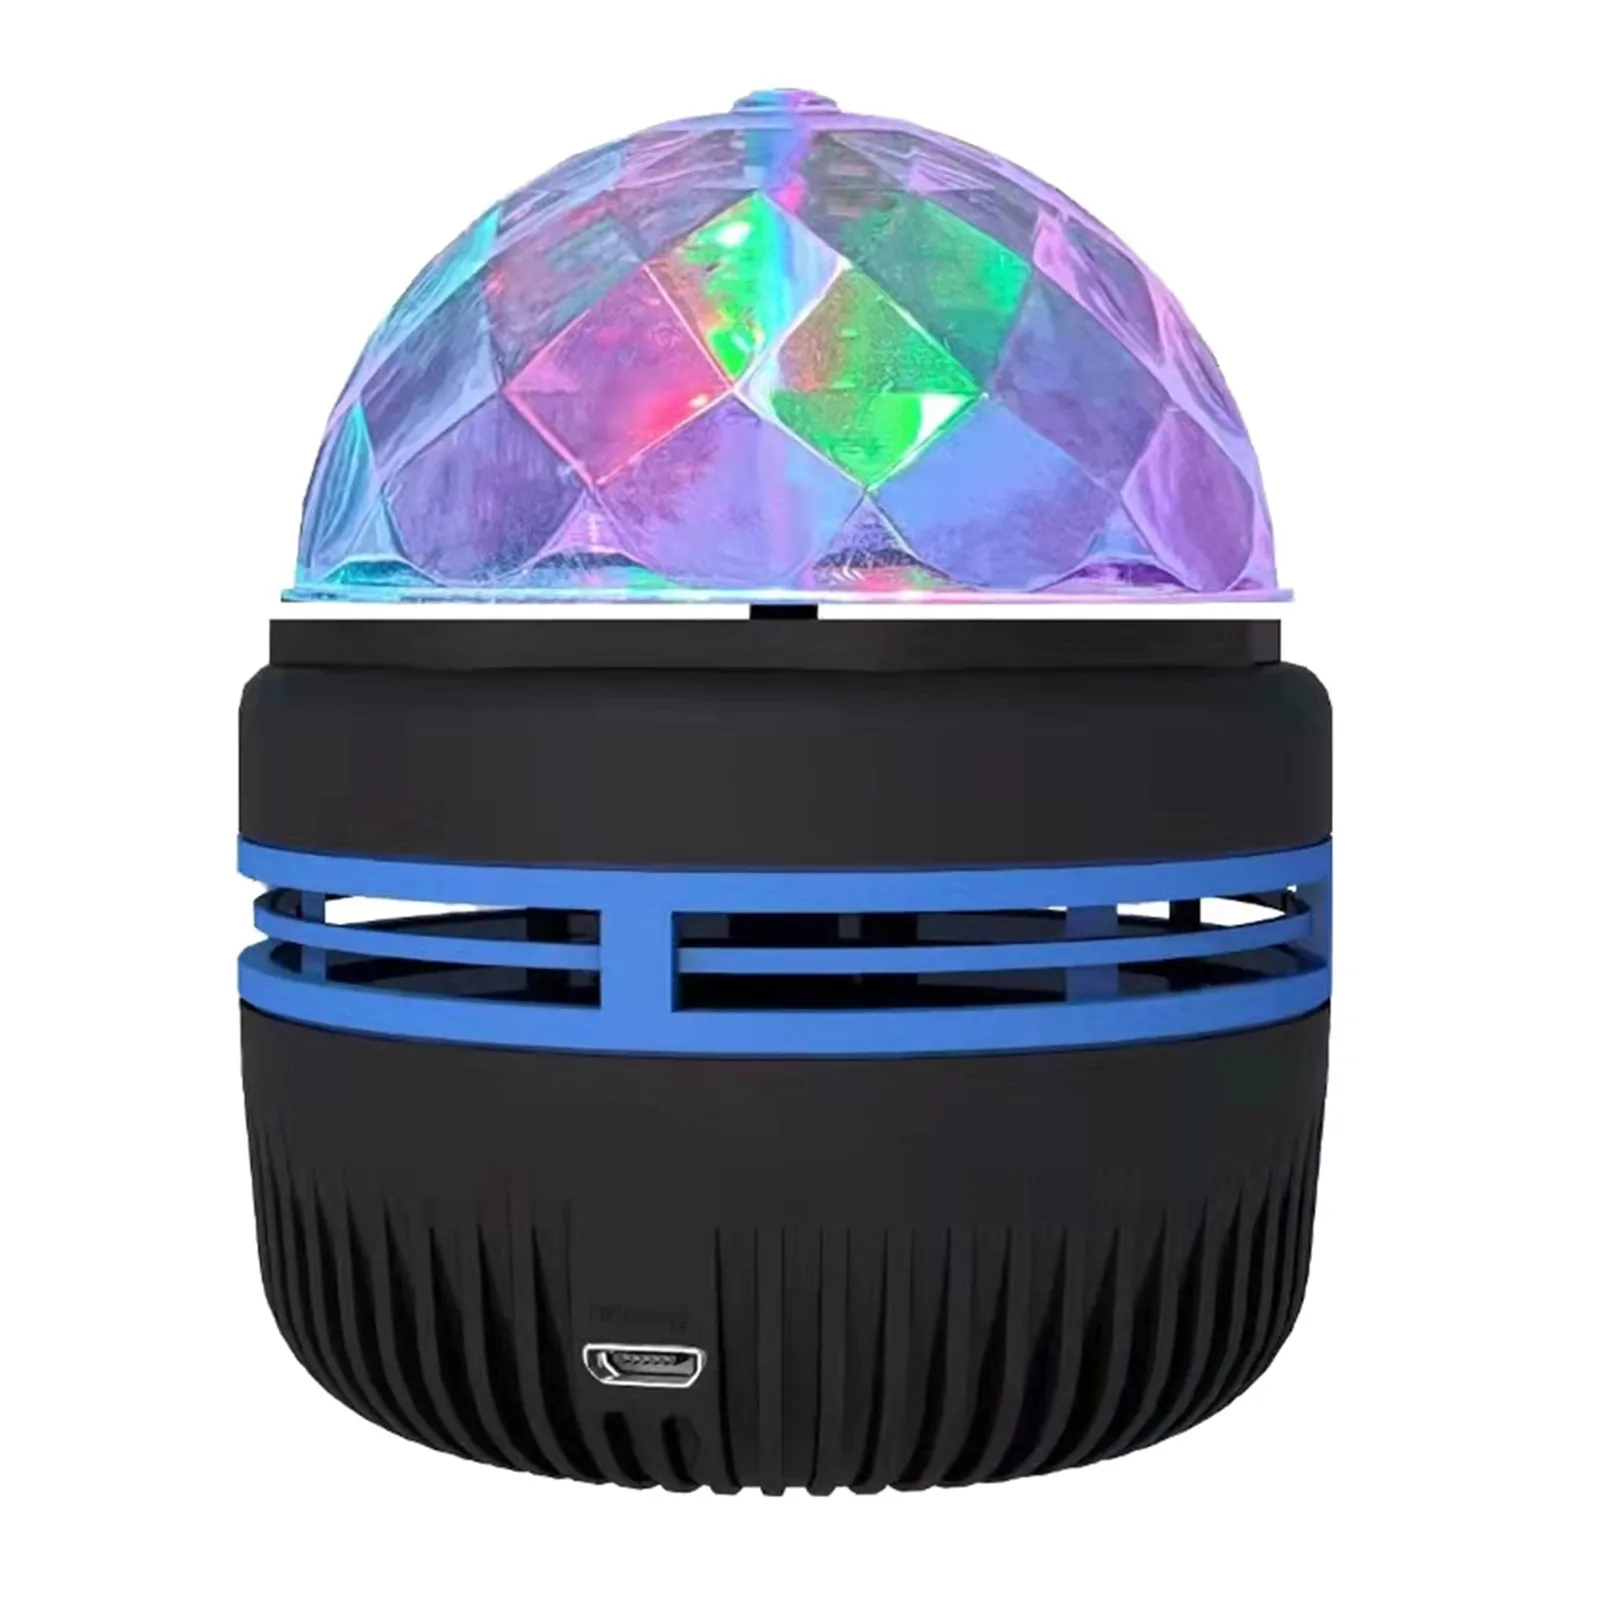 Usb Projection Lamp Magic Ball Light Sky Full Of Sky Projection Lighting Flashing Stage Atmosphere Night Lights For Bedroom wall night light Night Lights